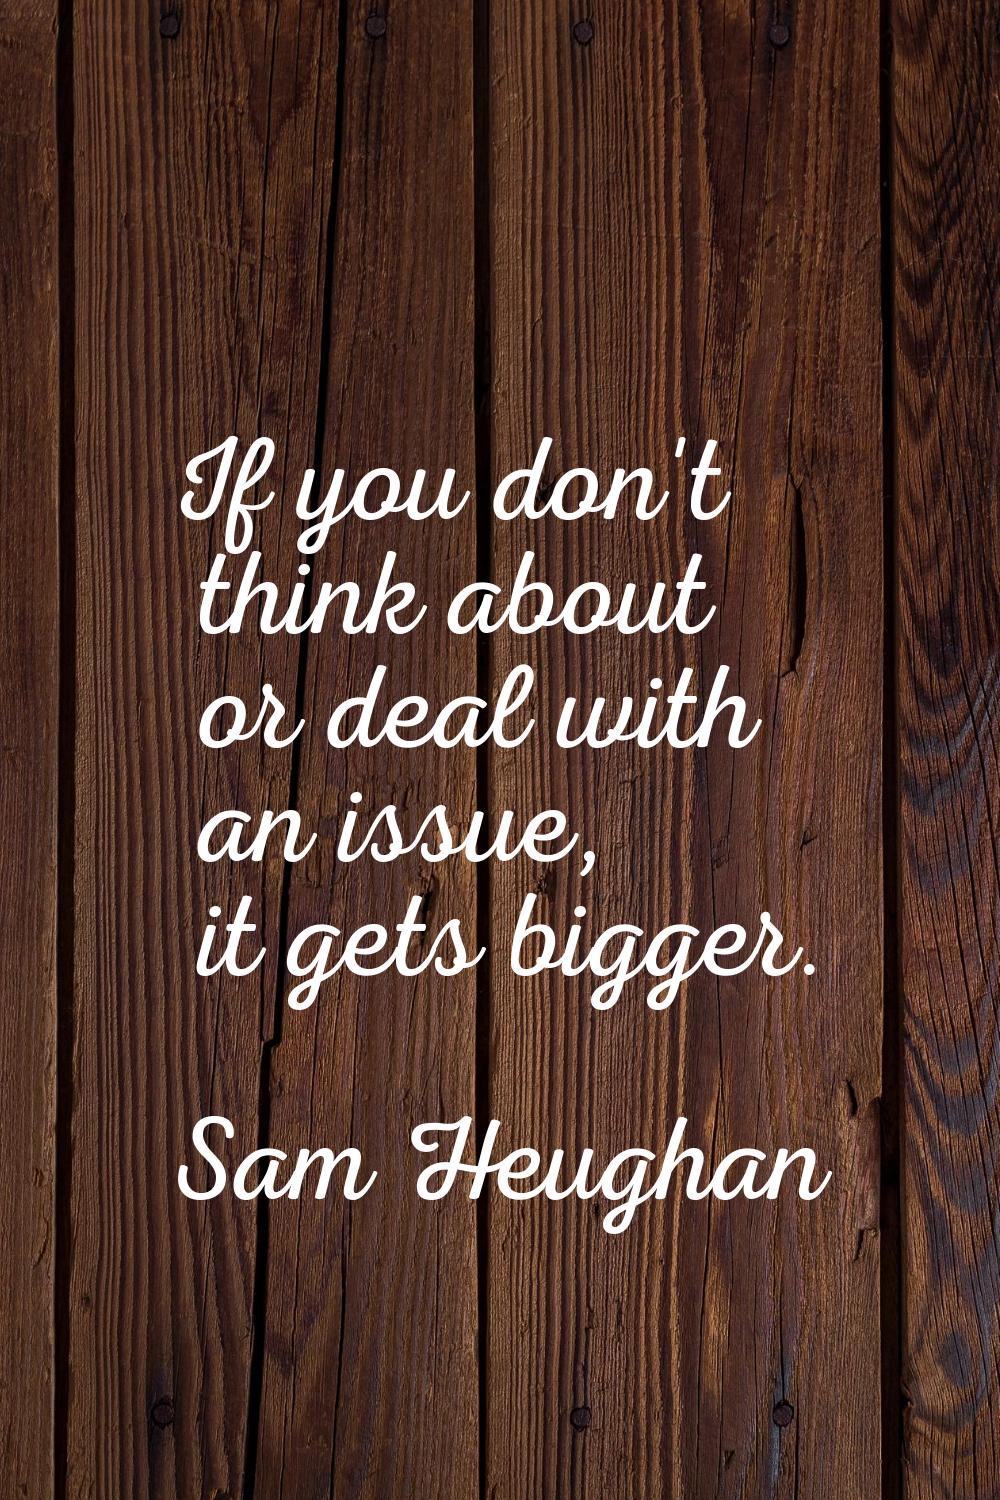 If you don't think about or deal with an issue, it gets bigger.